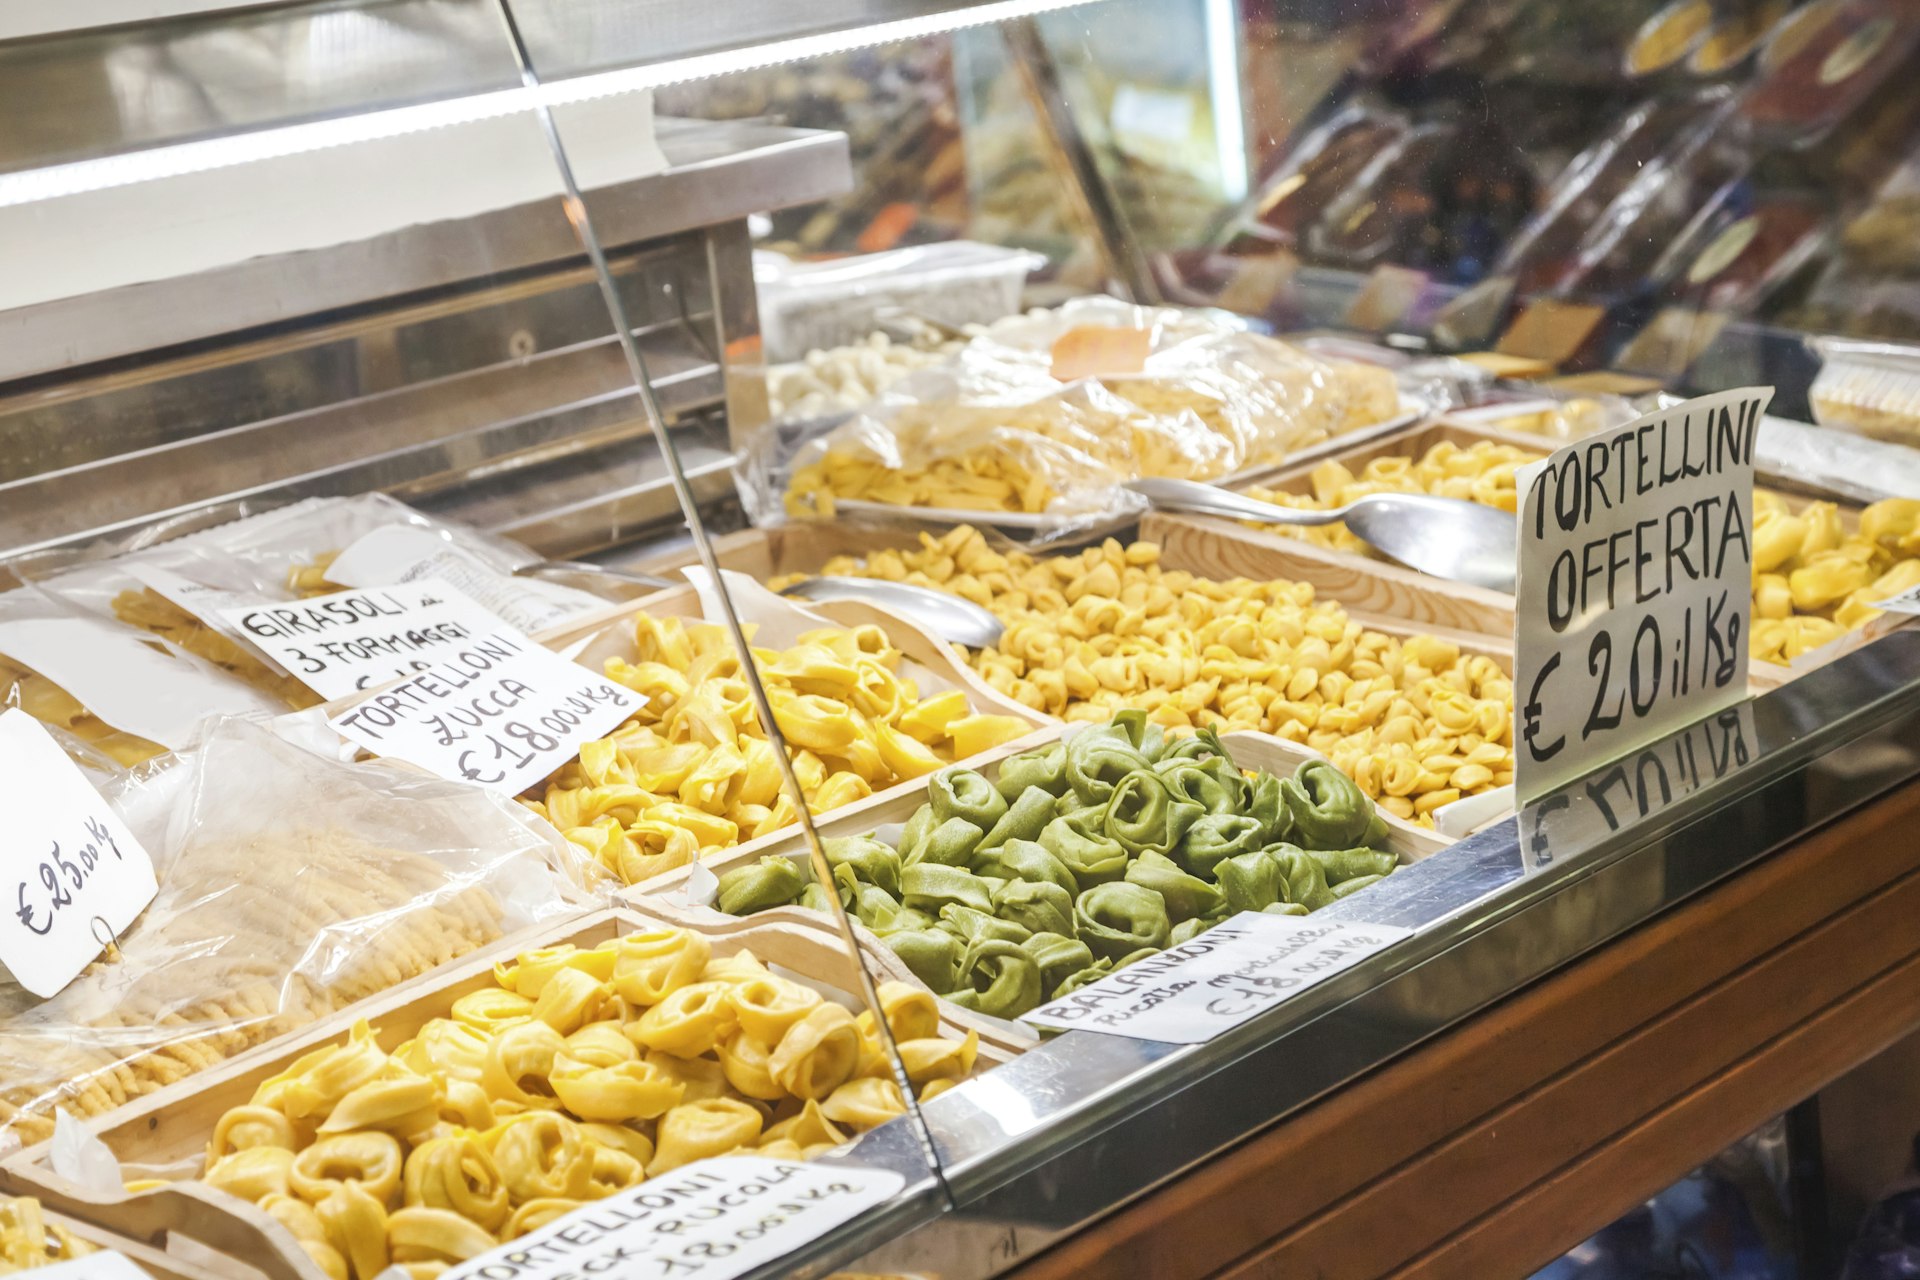 A store in Bologna selling vast quantities of pasta, including tortellini and tortelloni. The pasta is displayed next to prices, written in Italian.